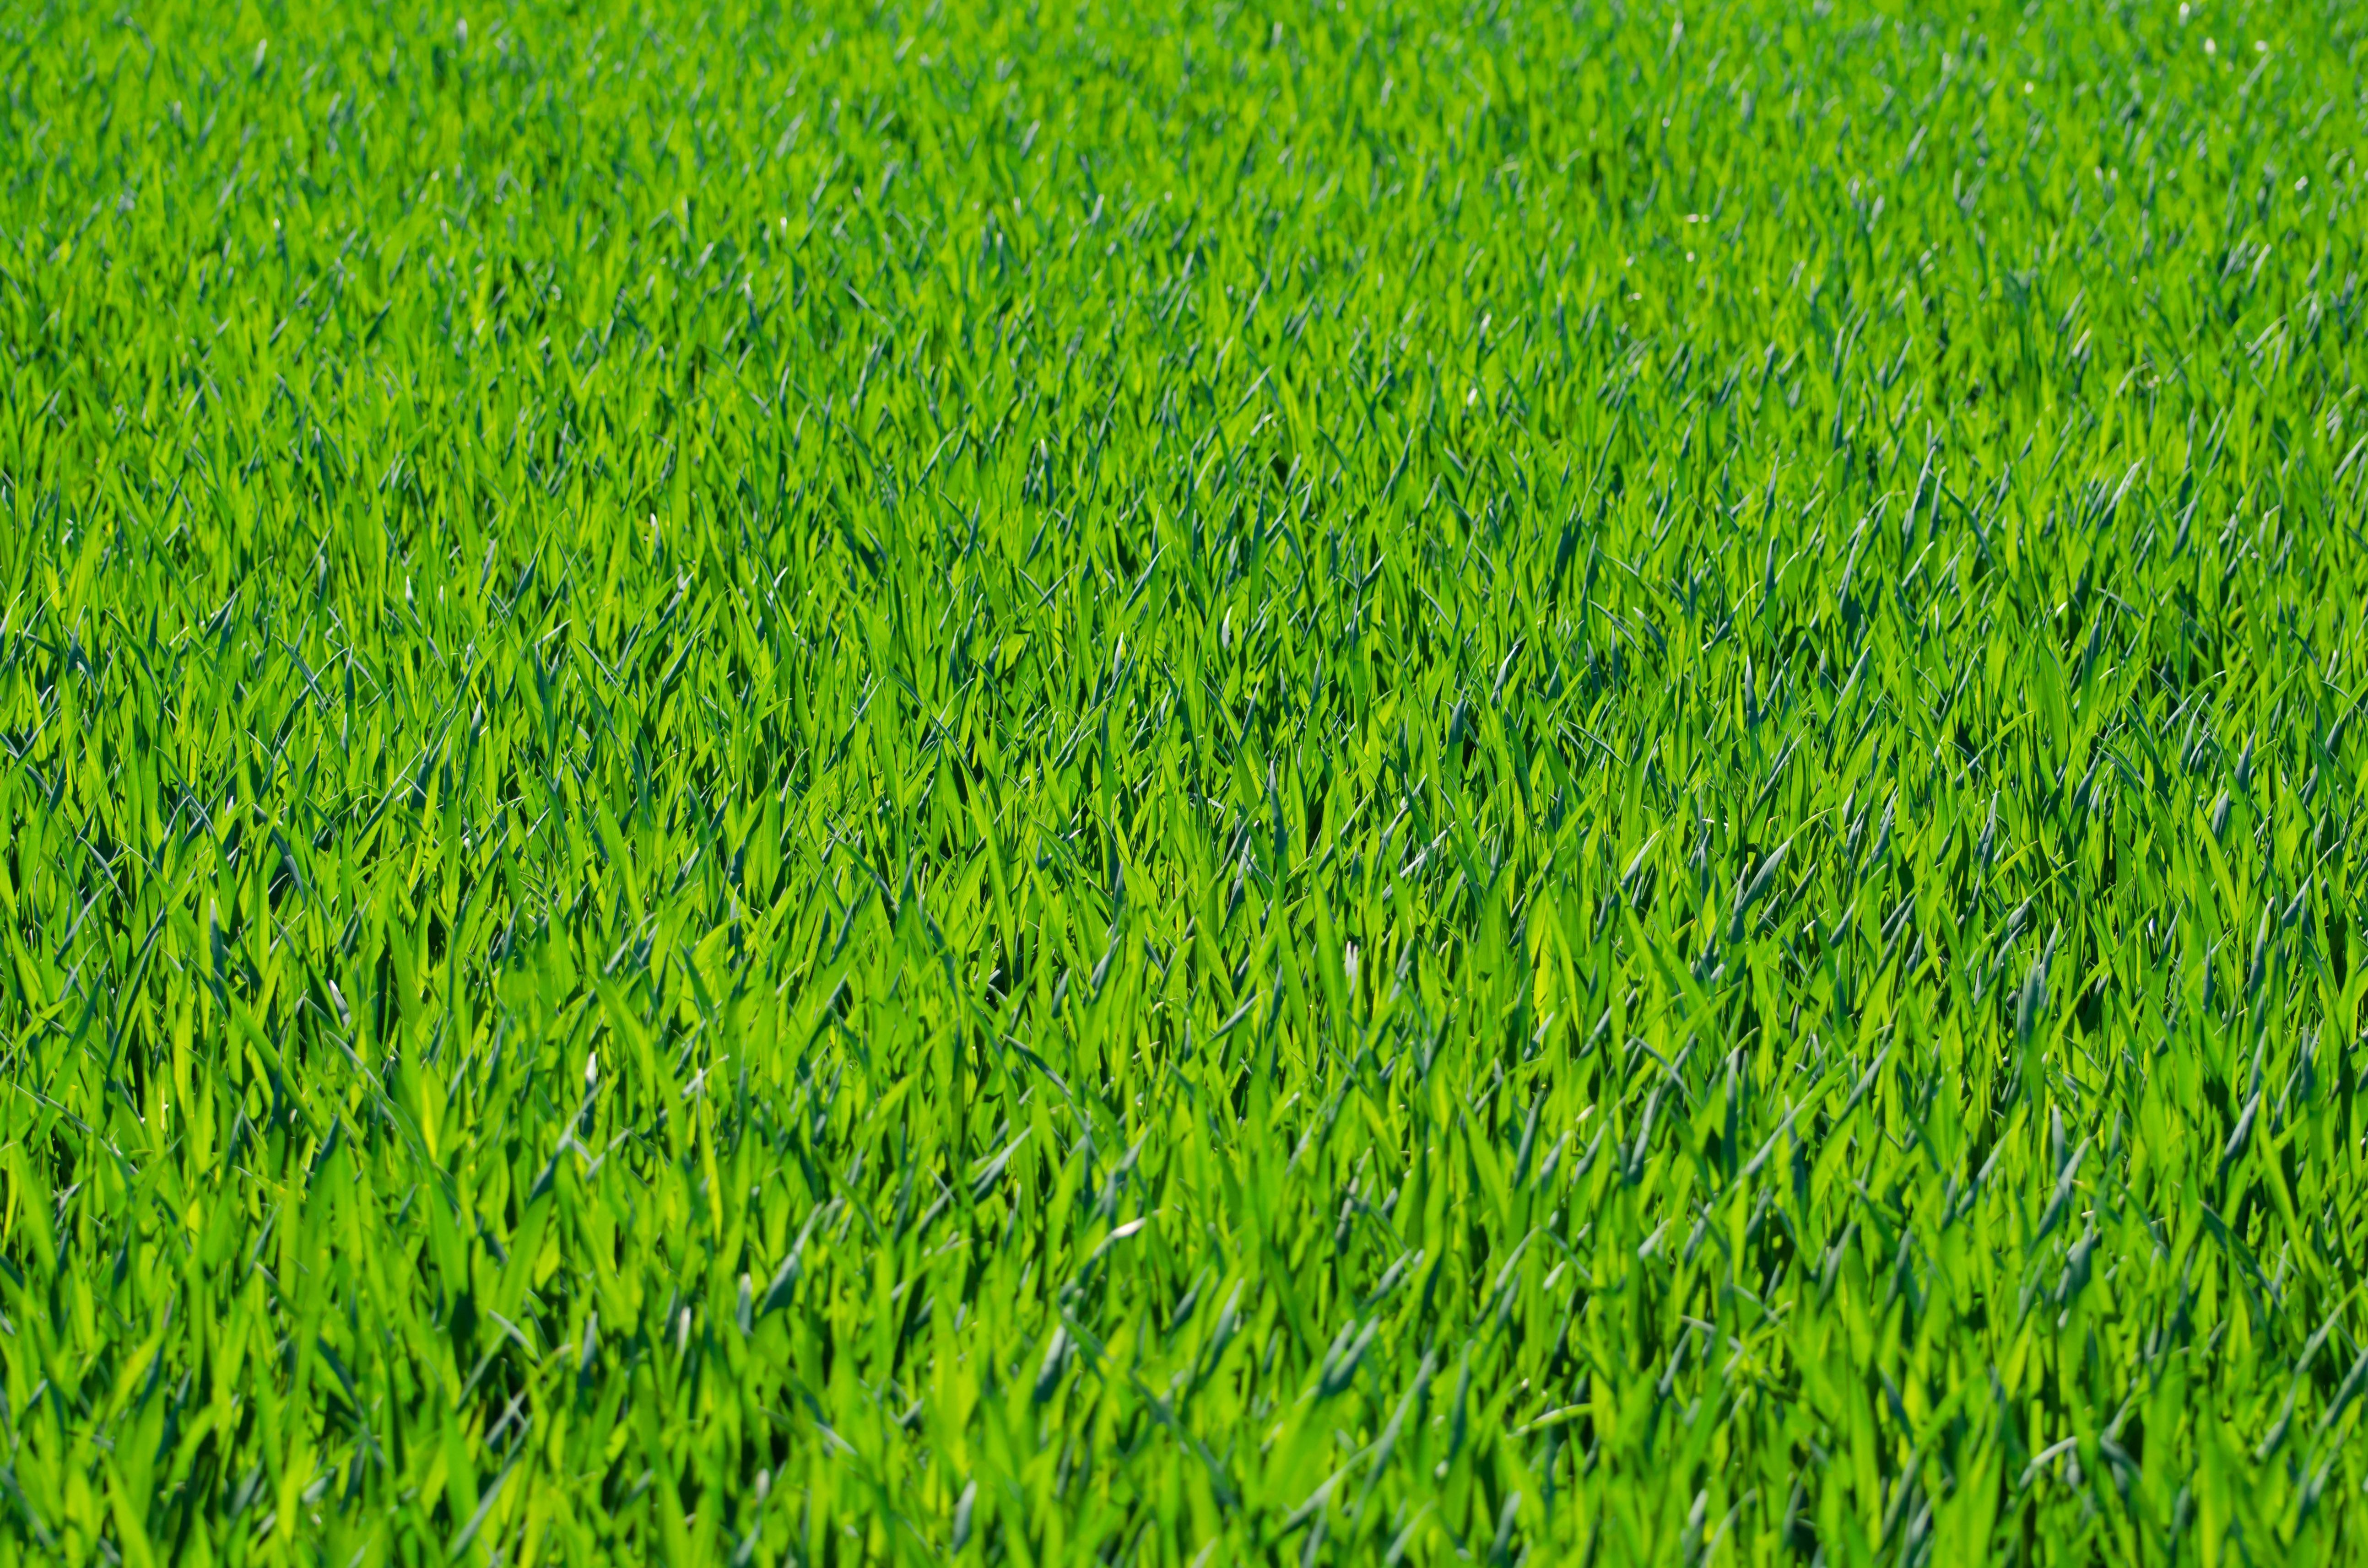 Seven Free Grass Textures or Lawn Background Images | www ...